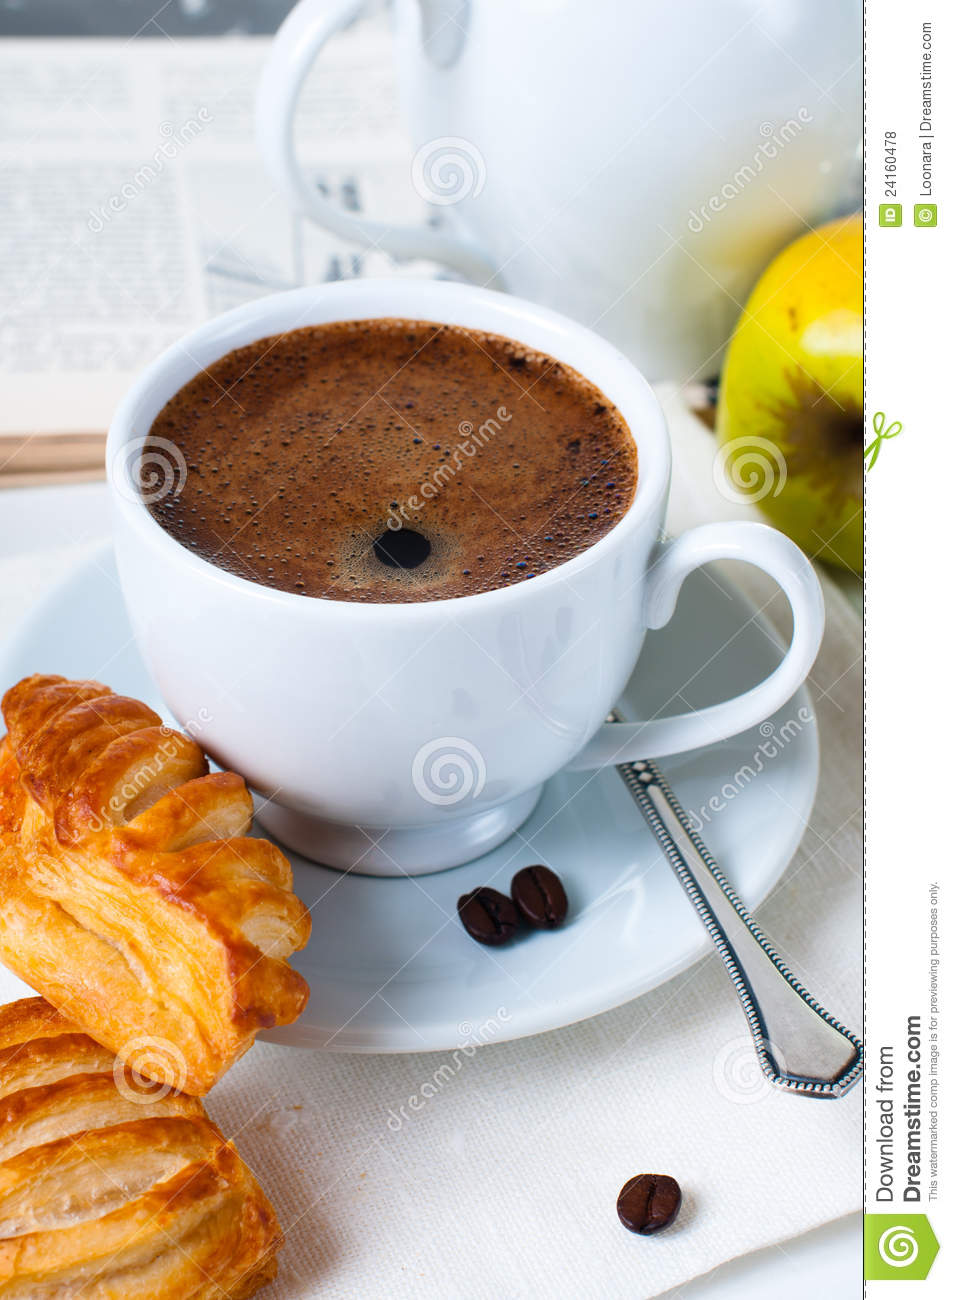 Breakfast Coffee And Pastries Closeup Royalty Free Stock Photos    